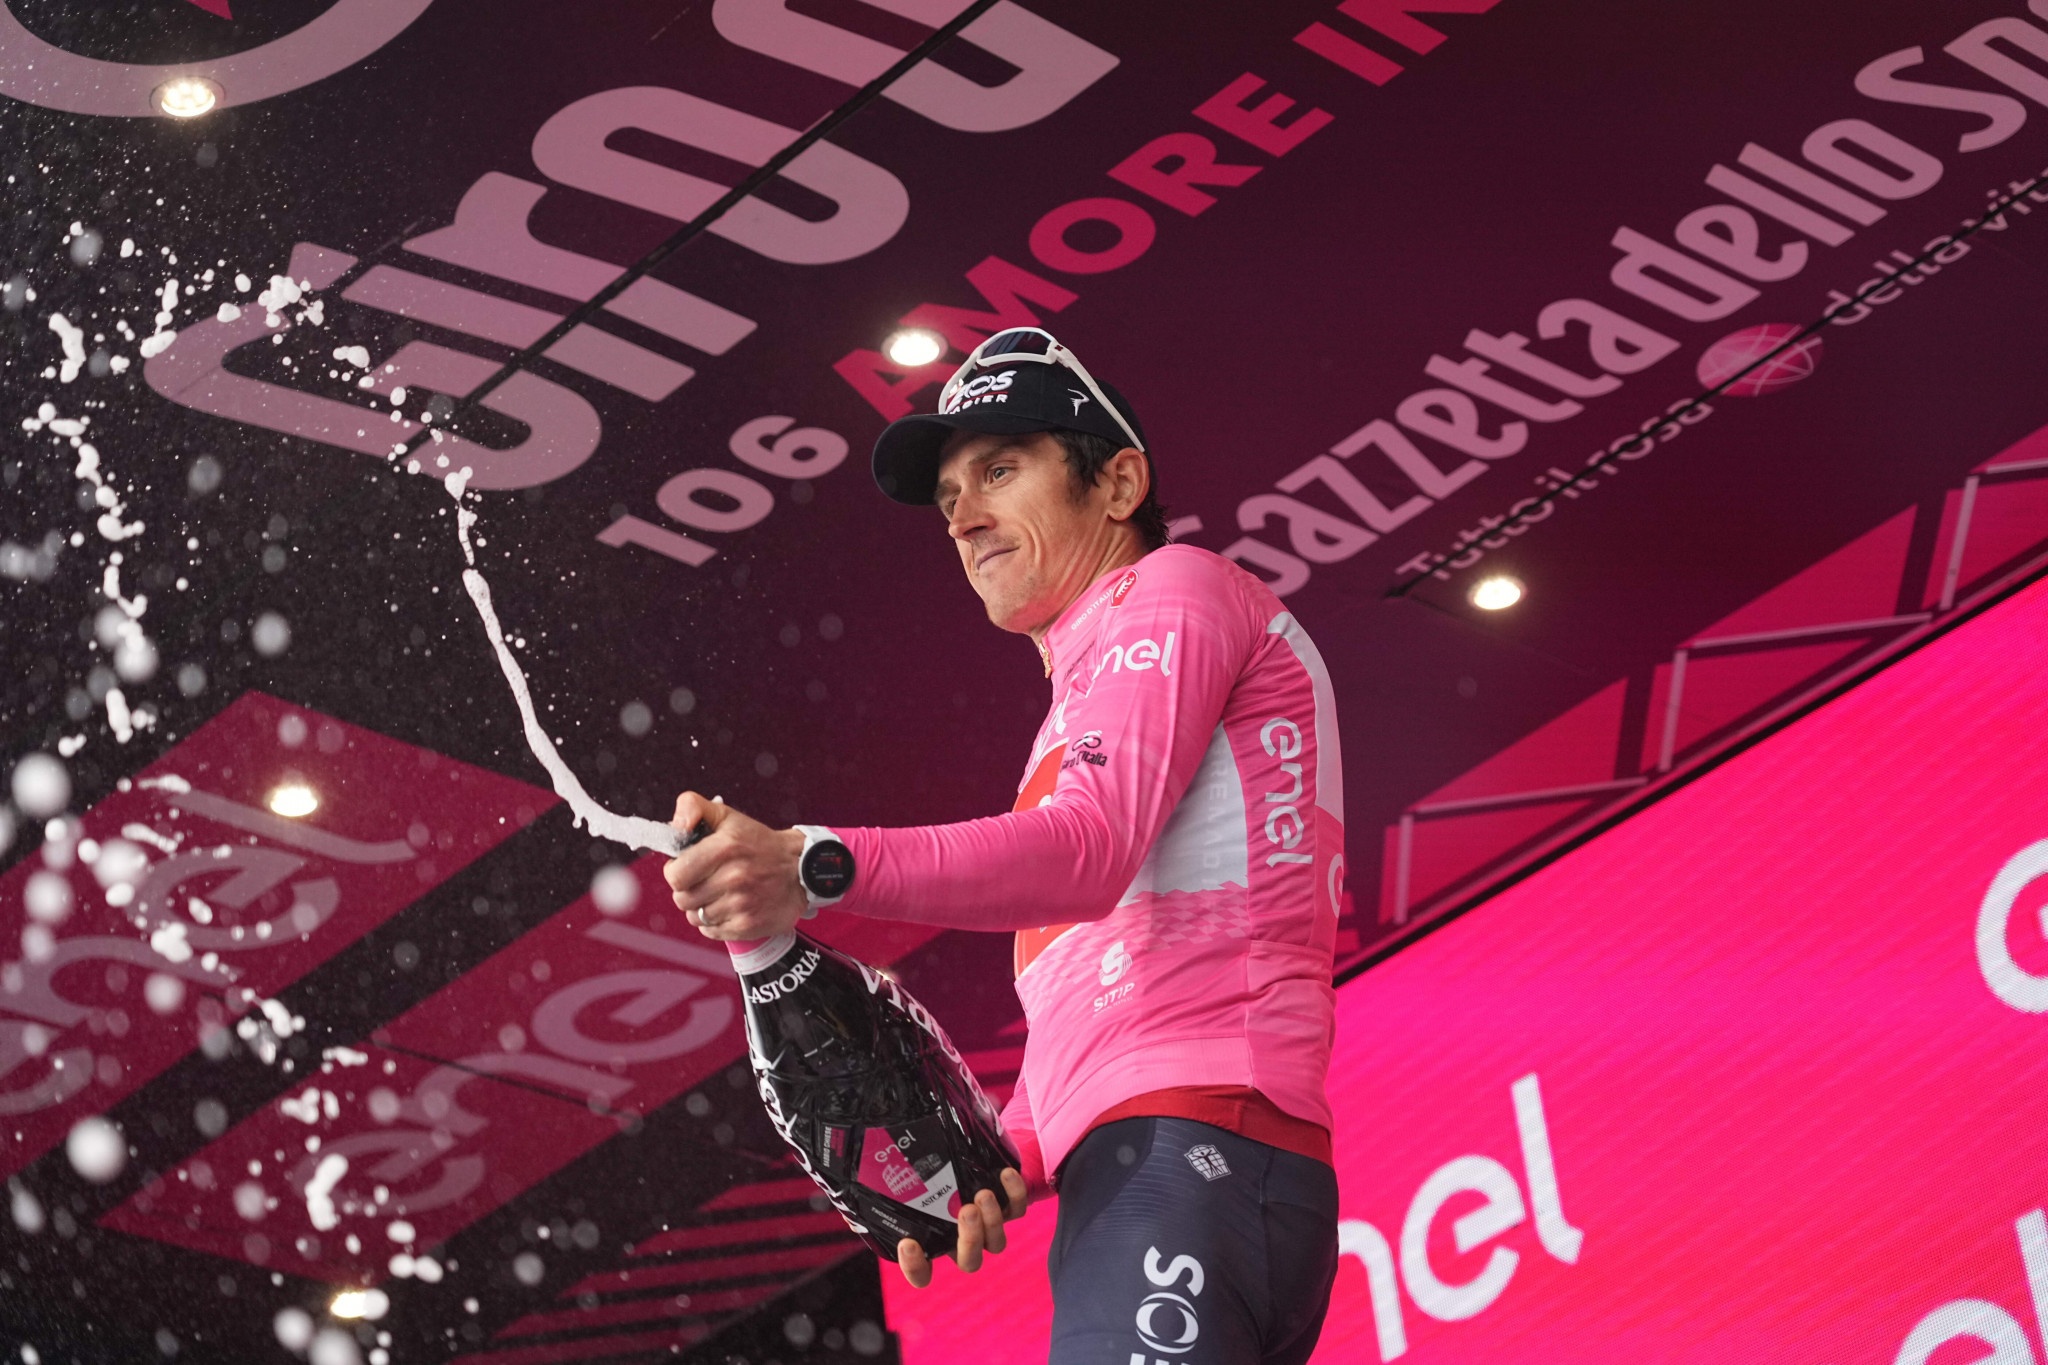 Geraint Thomas, who has claimed the overall lead at the Giro d'Italia, holds an 18-second lead in the standings ©La Presse